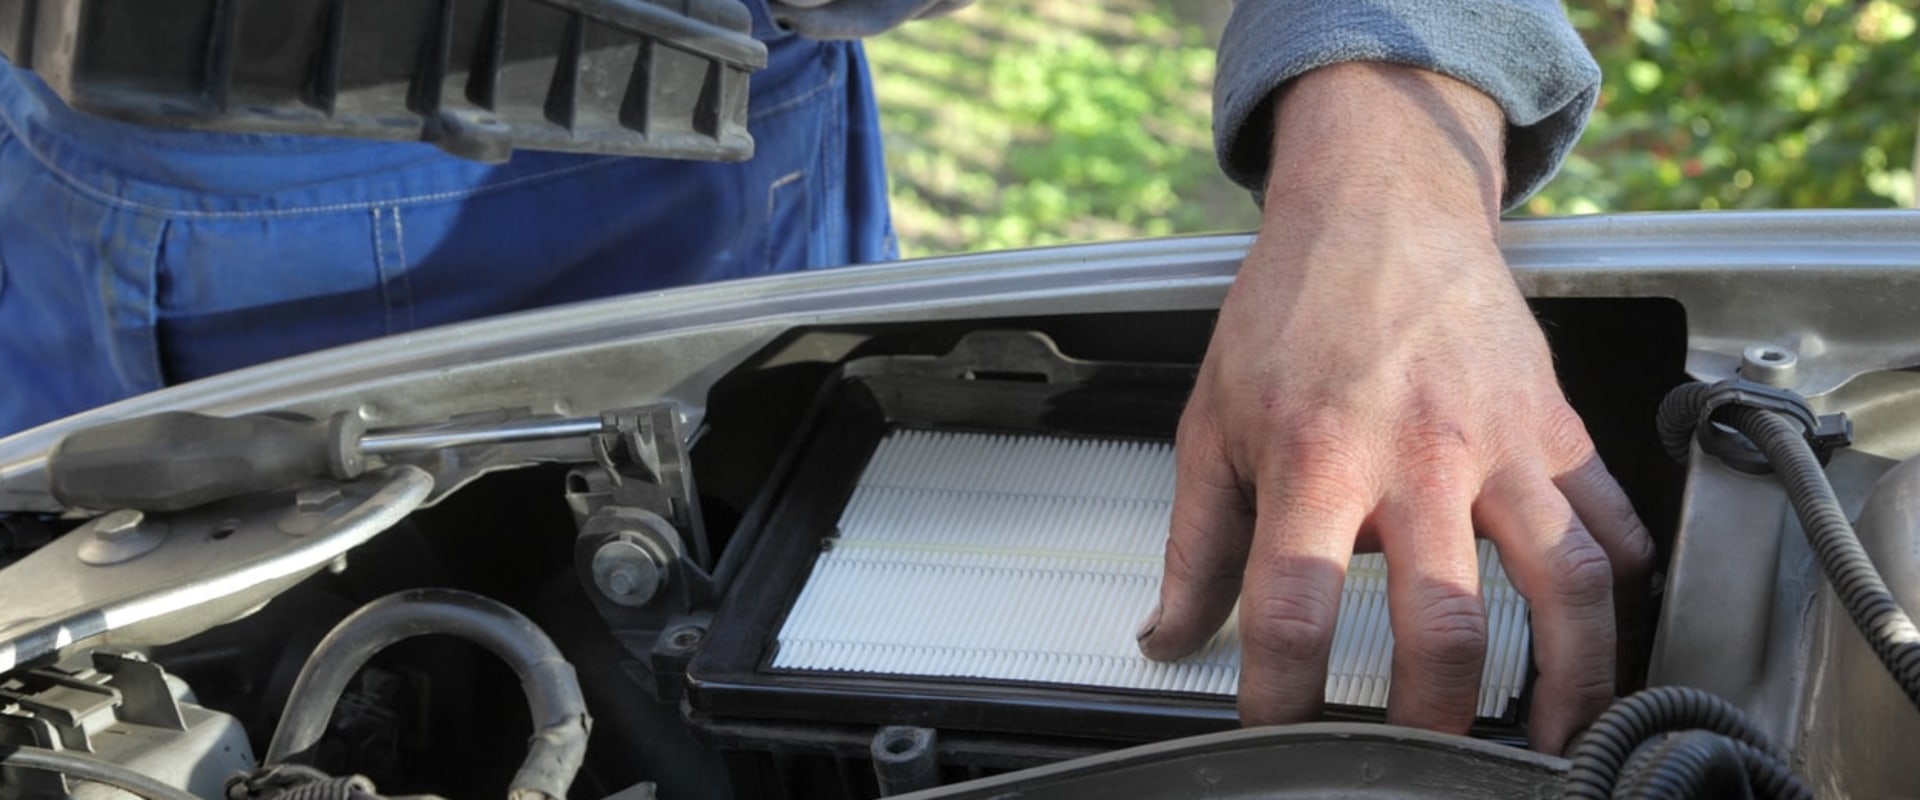 Do You Really Need to Change Your Car's Air Filter?